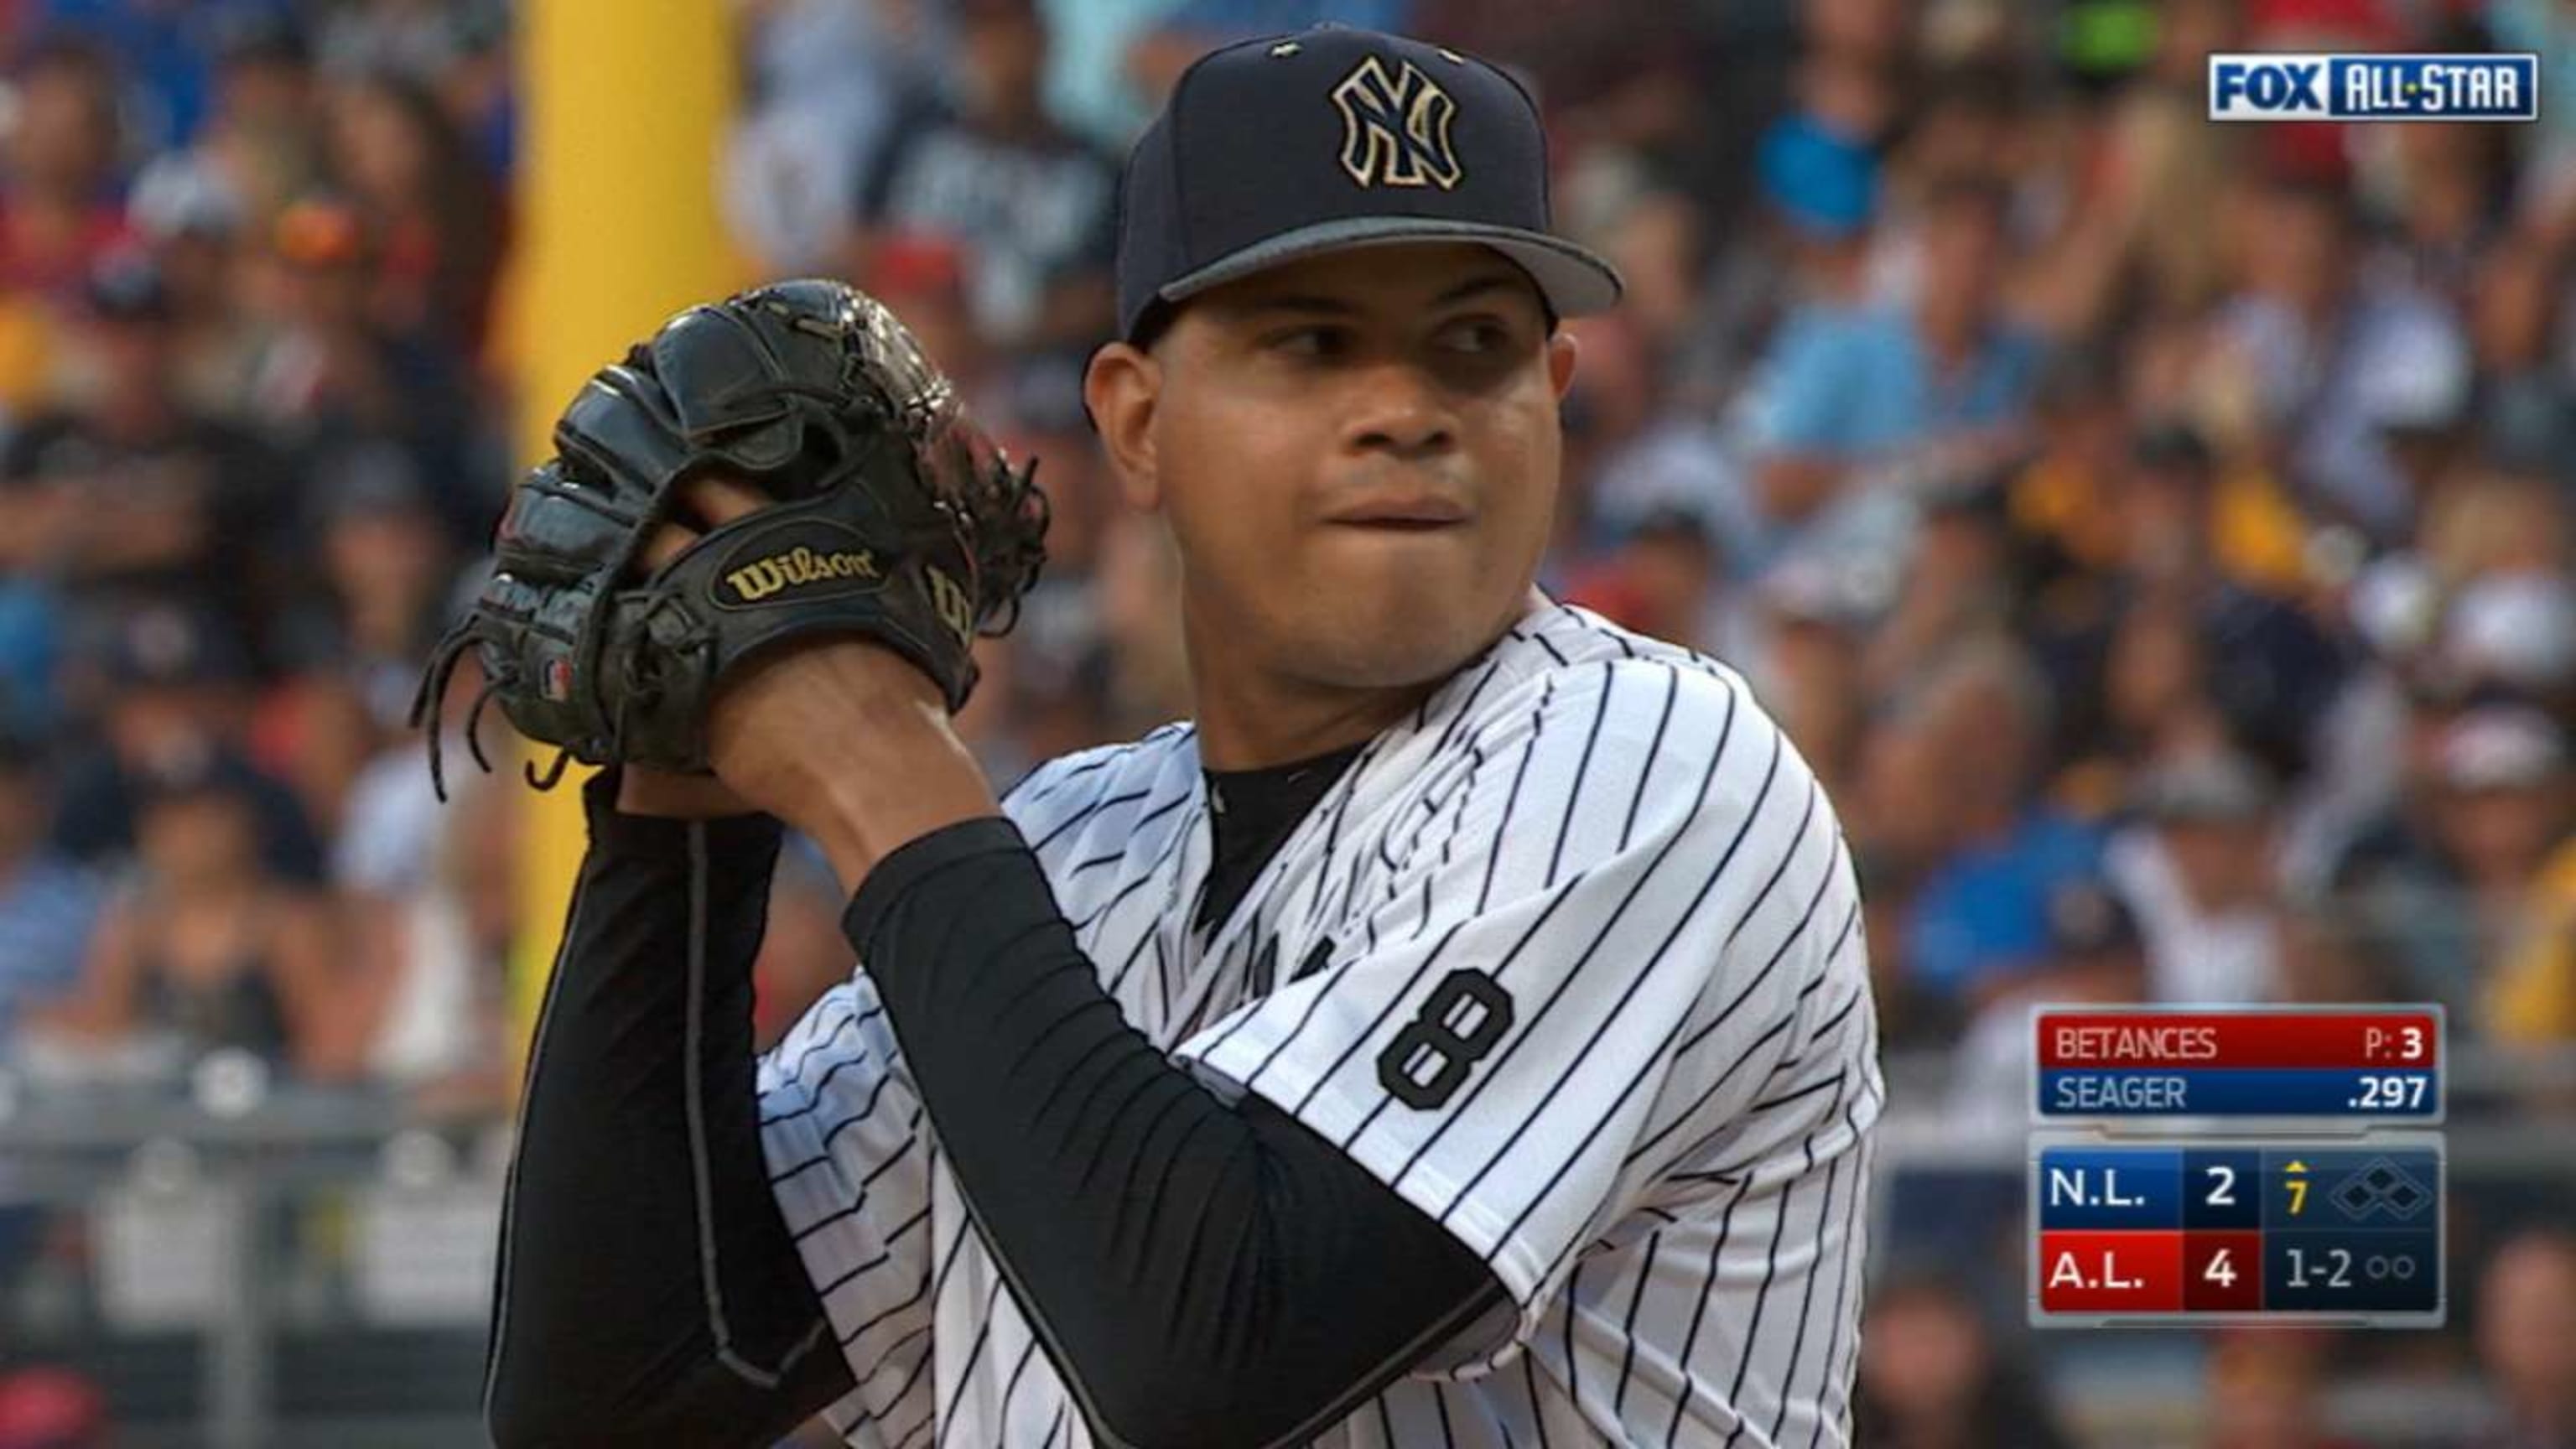 In wild card win, New York Yankees' Dellin Betances saves the day